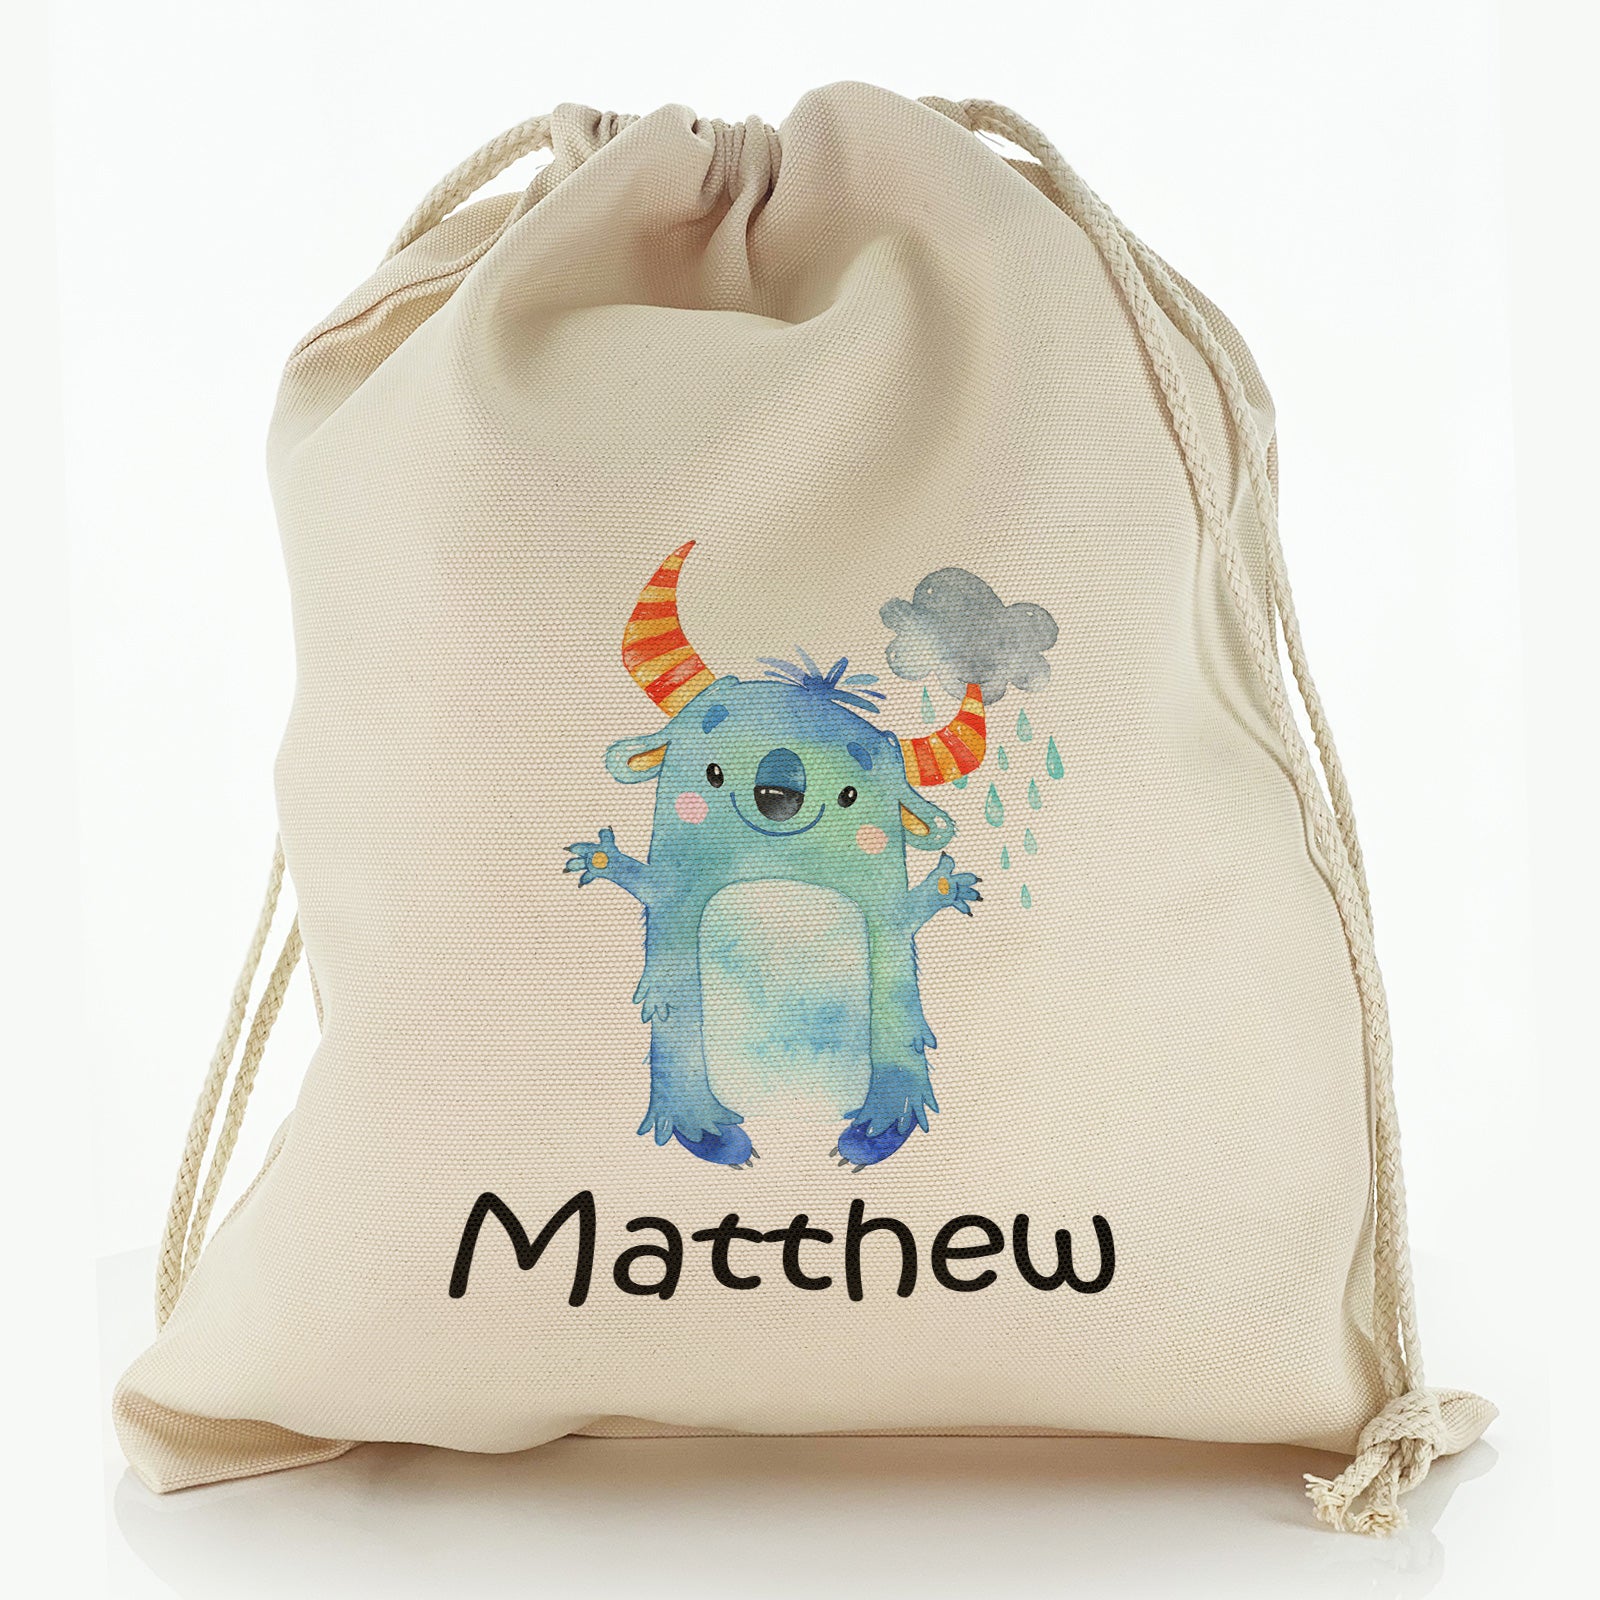 Personalised Canvas Sack with Childish Text and Furry Blue Horned Clouded Monster